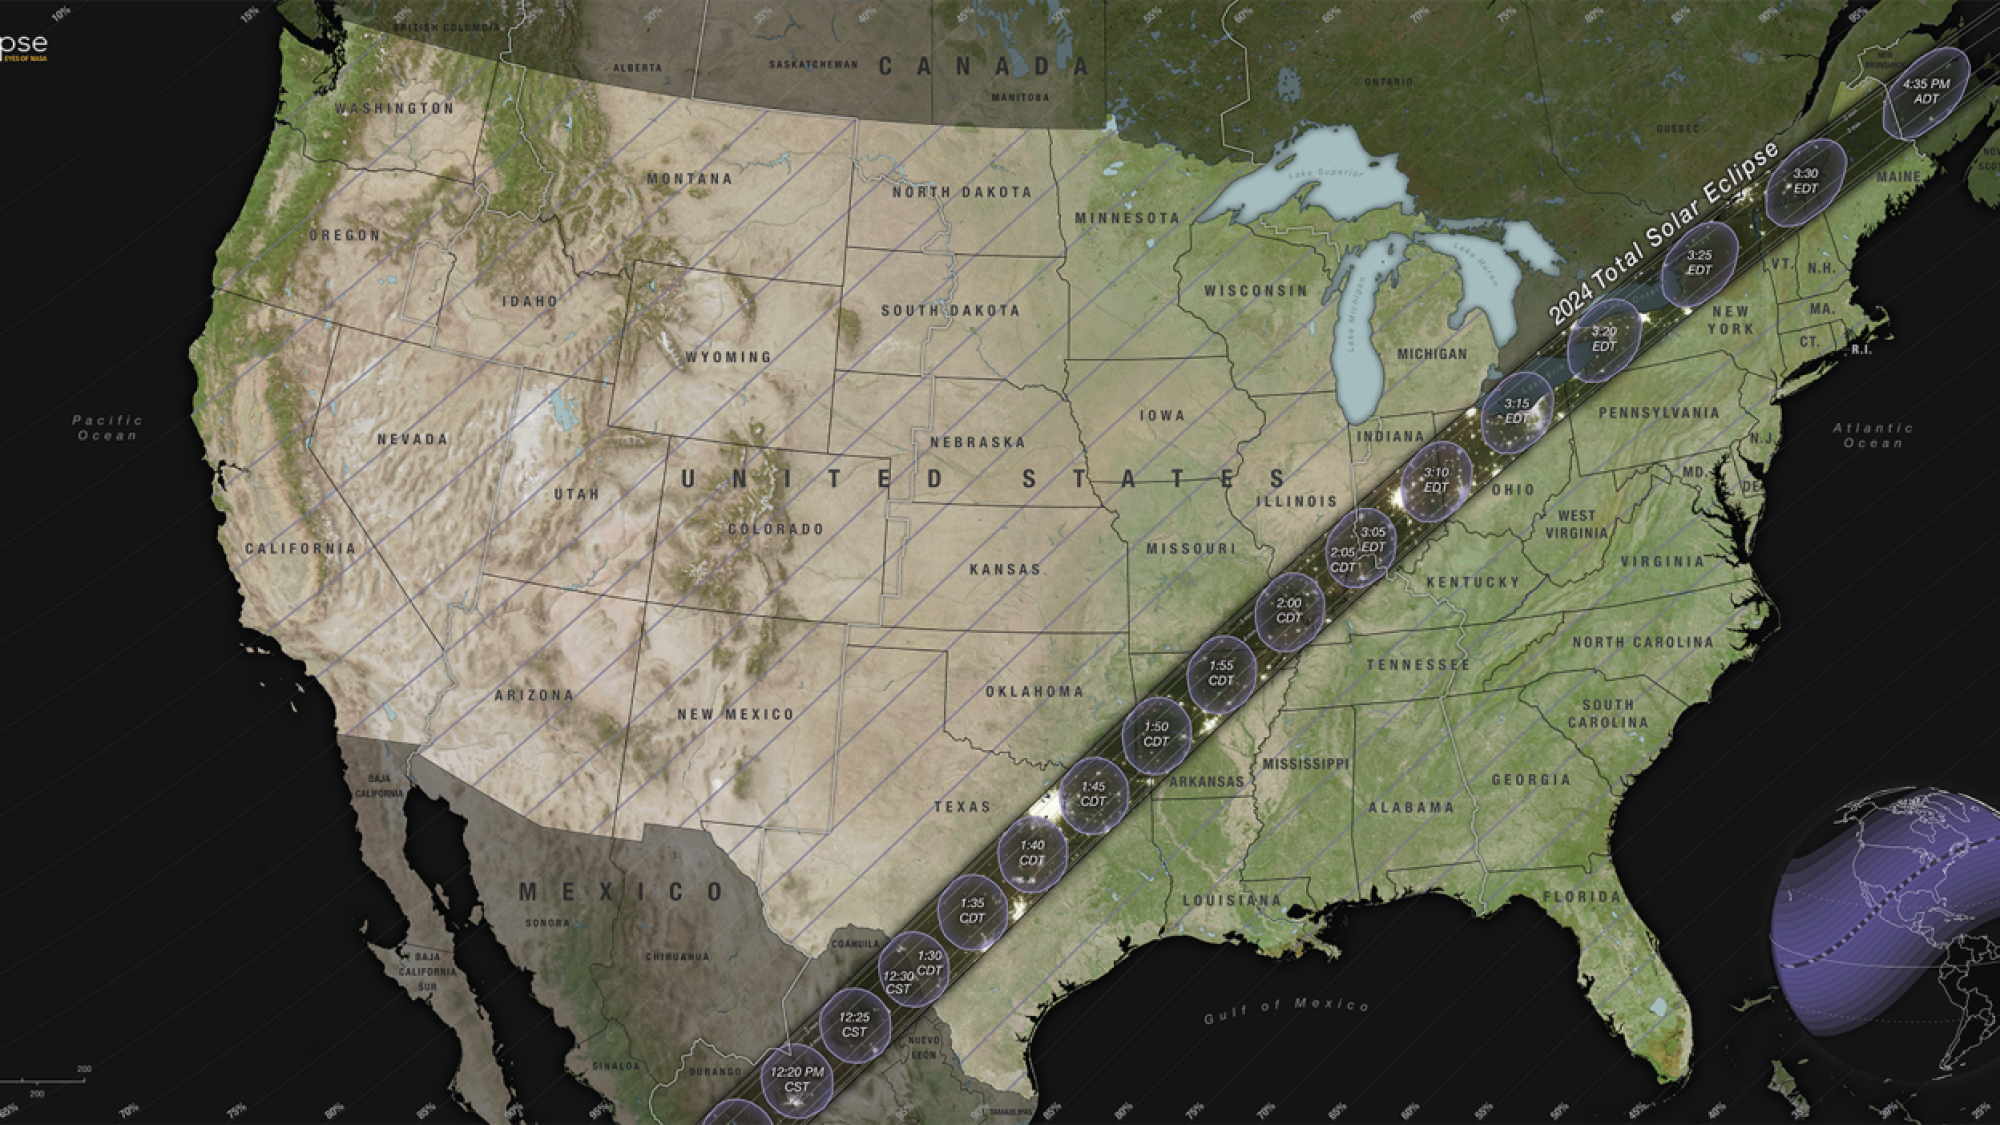 Moon's shadow sweeping across the United States